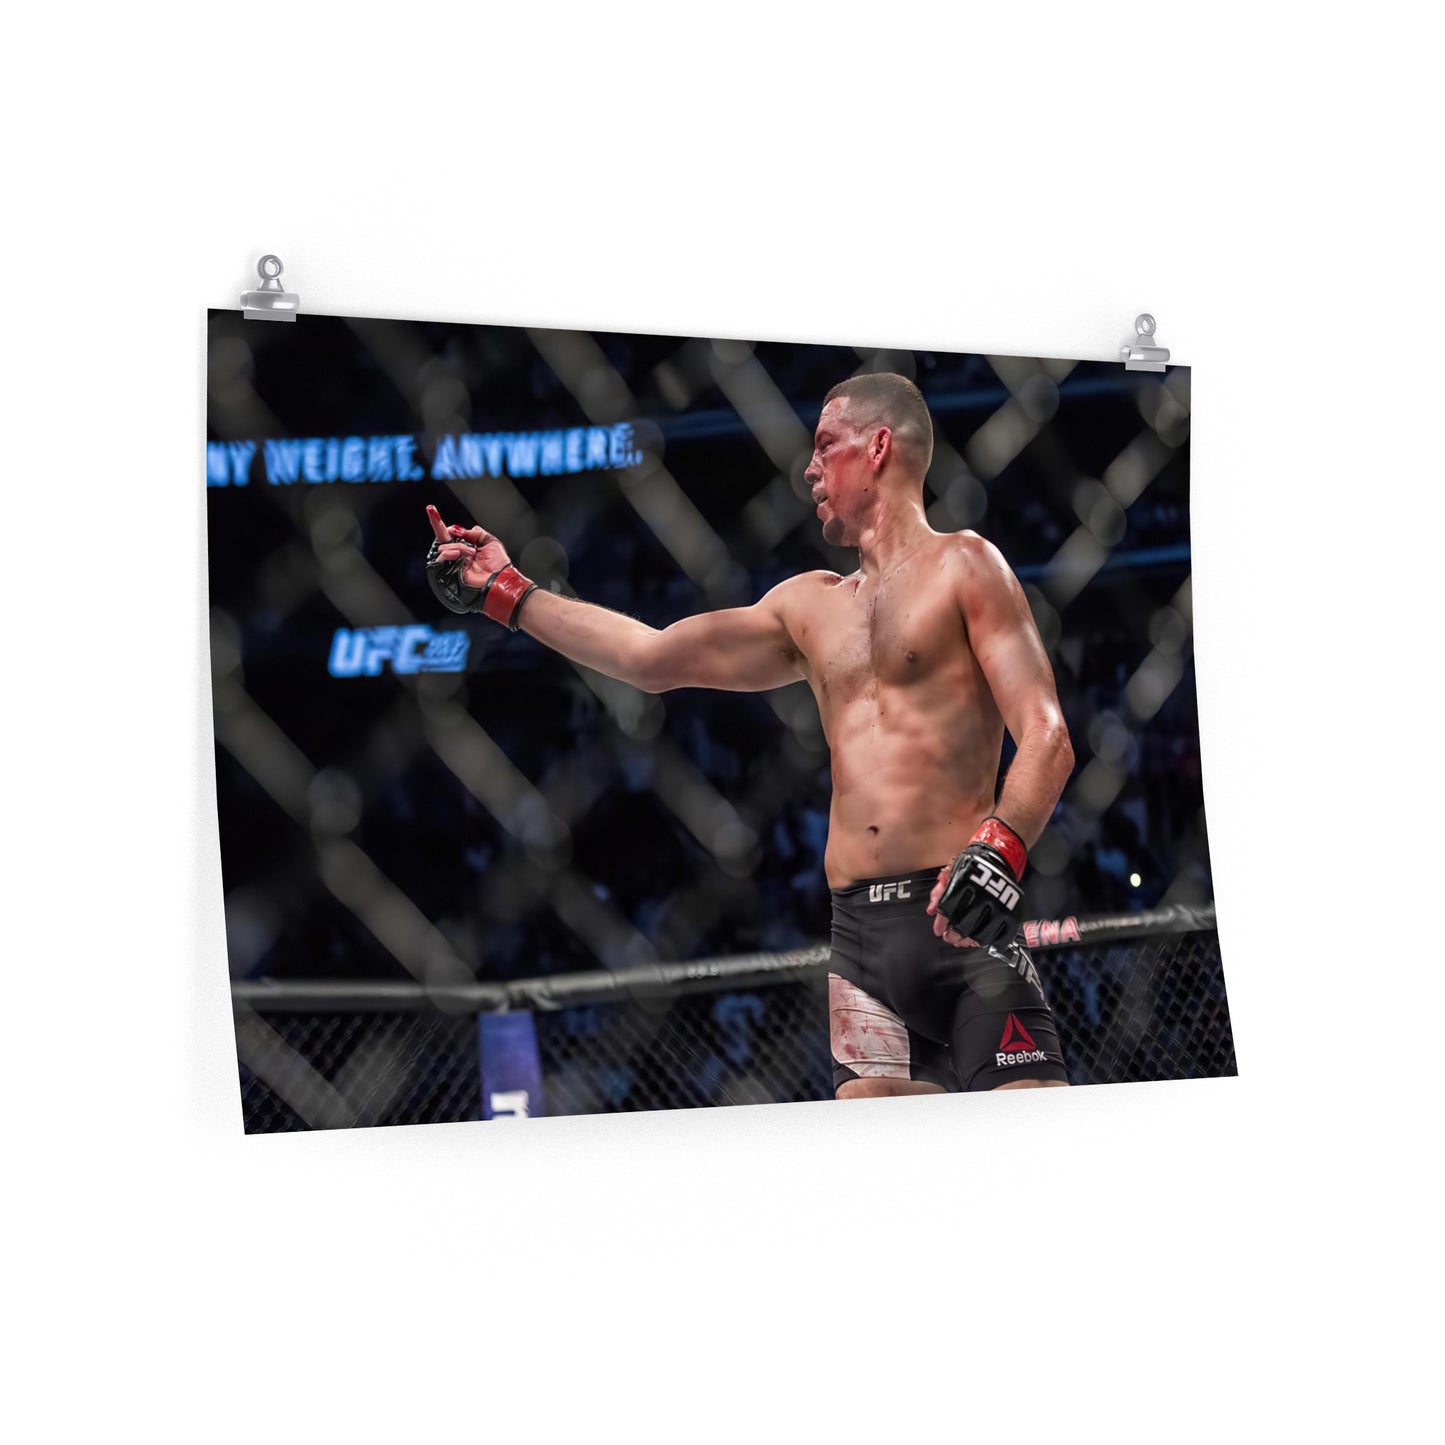 Nate Diaz Flips Off His Opponent In The Cage Poster